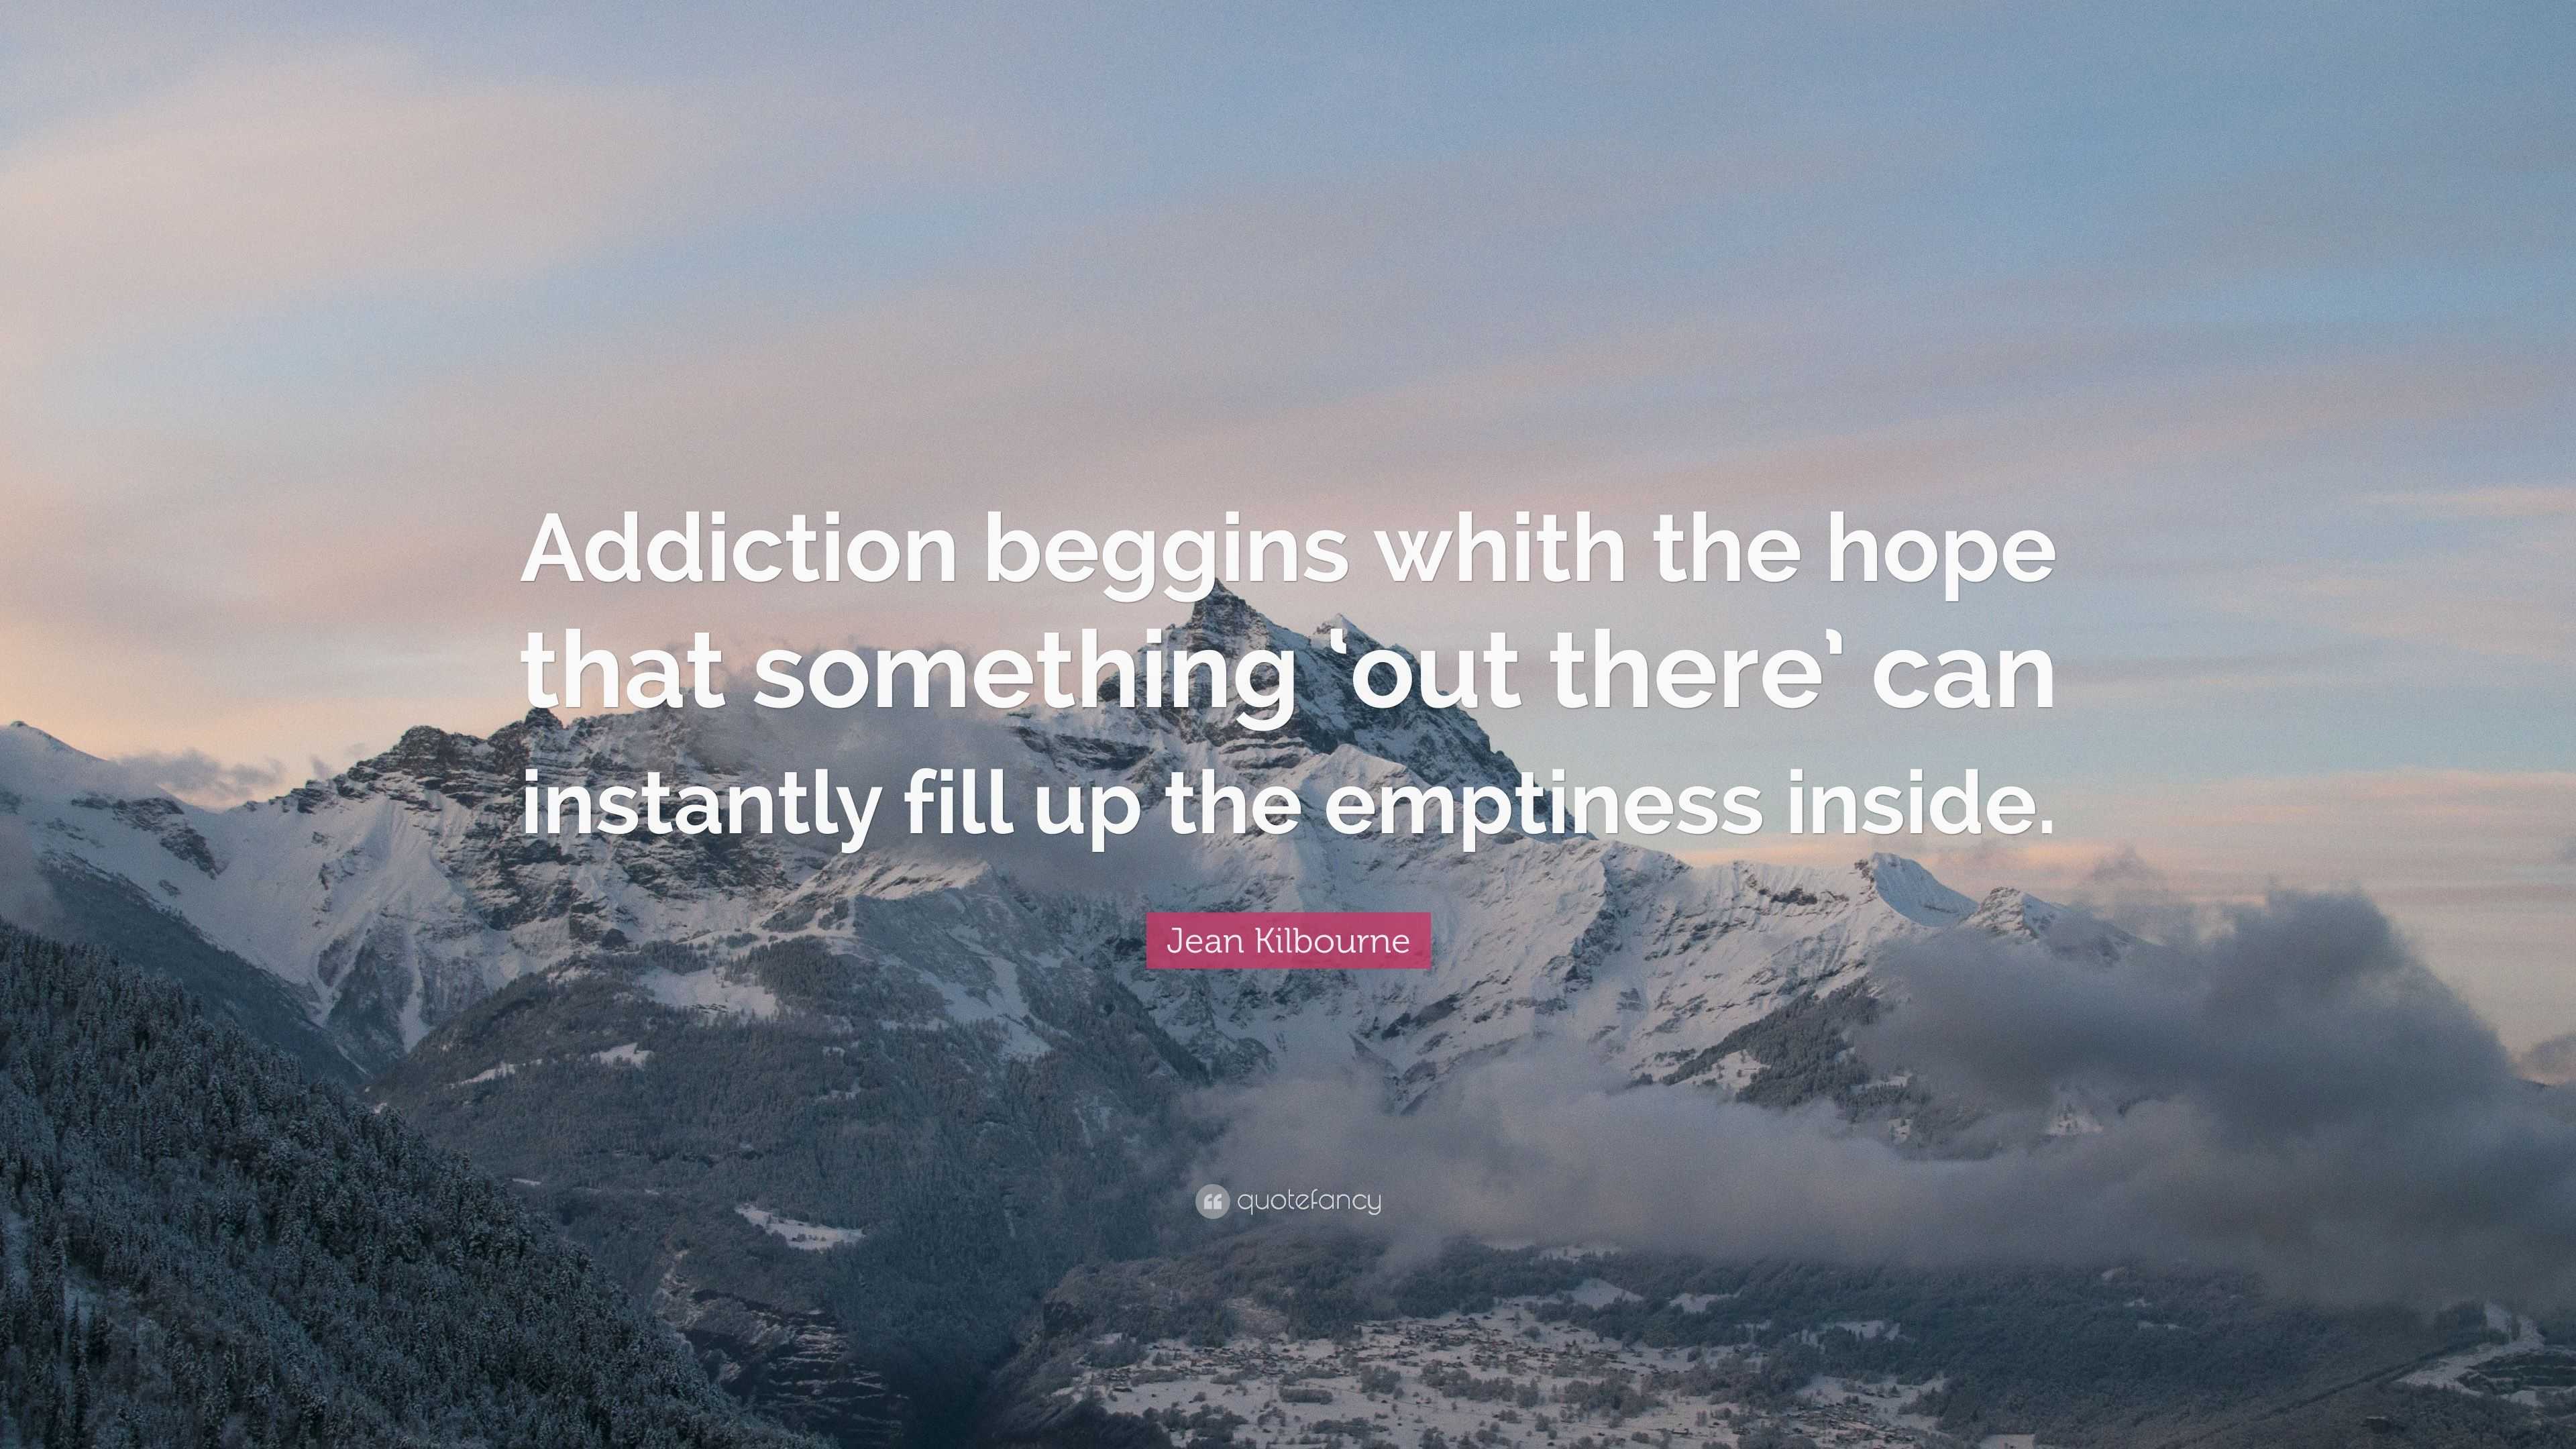 Jean Kilbourne Quote: “Addiction beggins whith the hope that something 'out  there' can instantly fill up